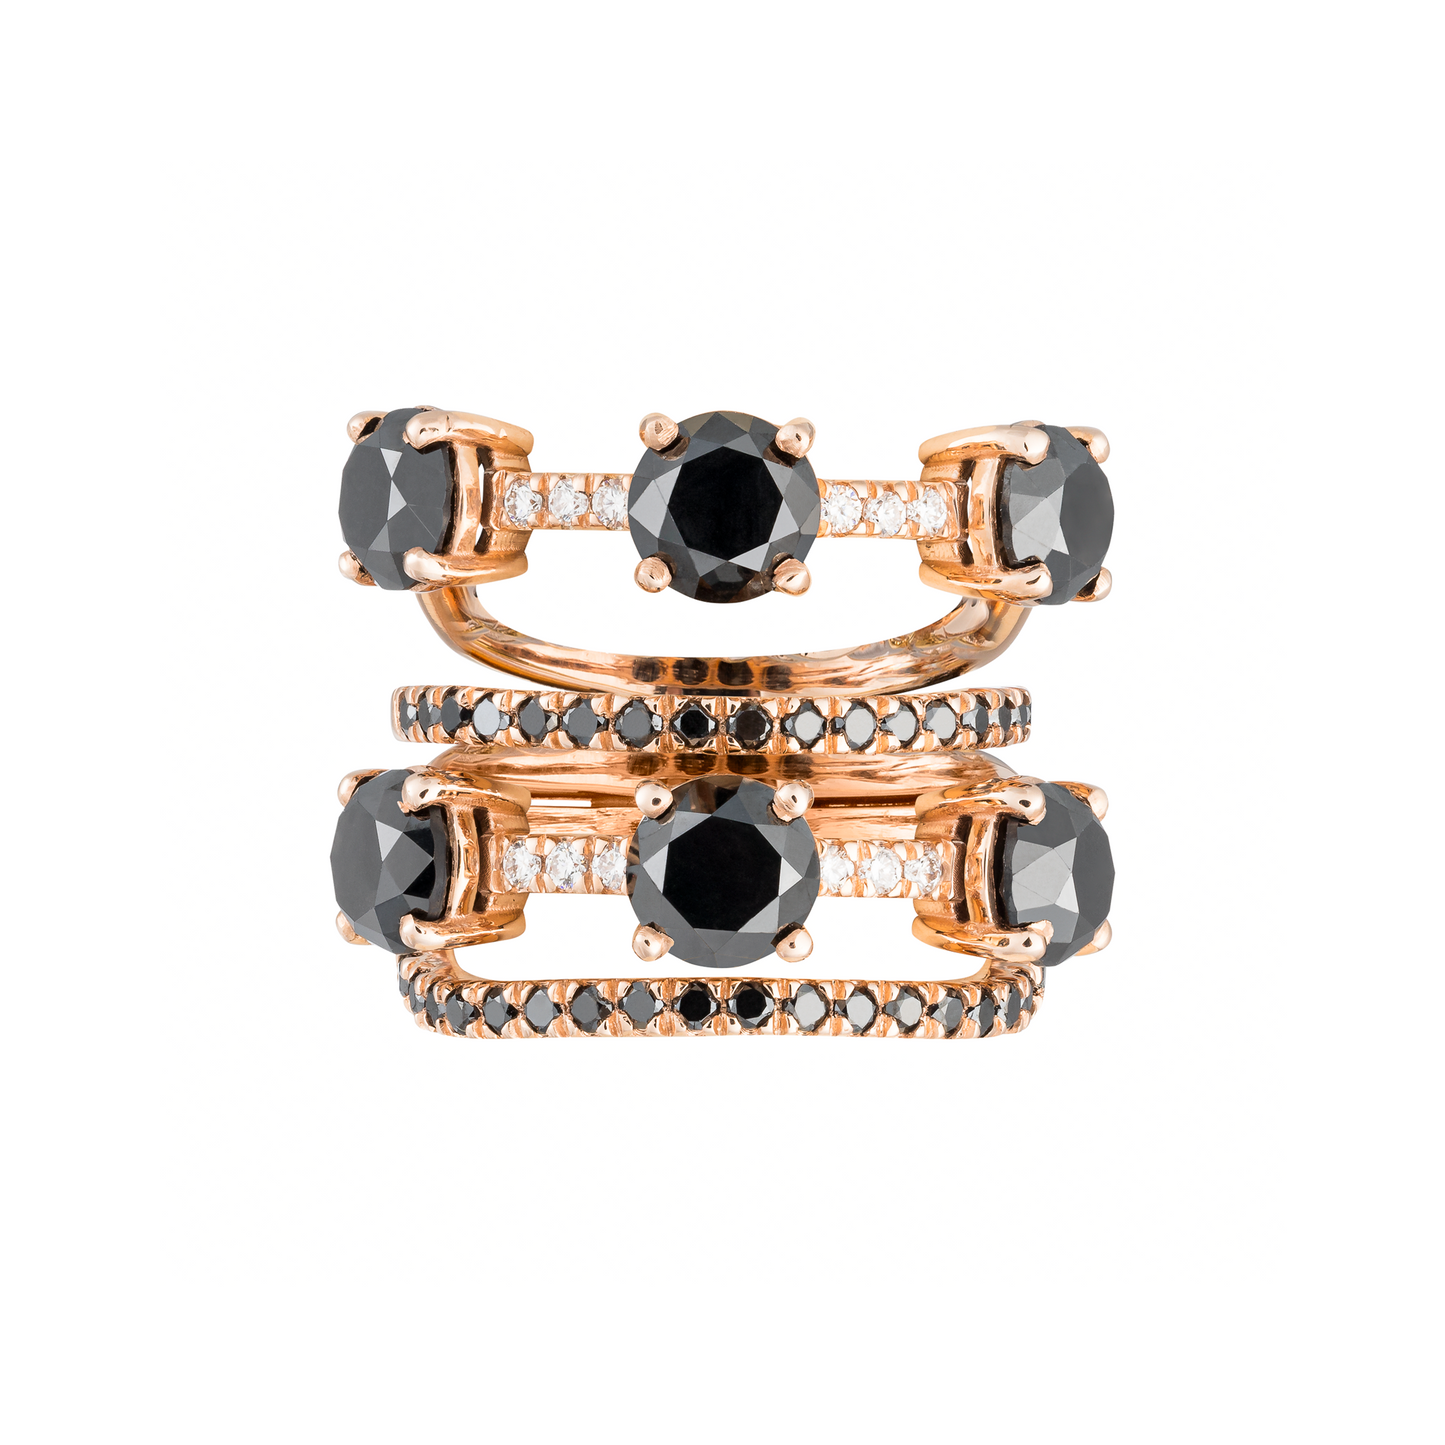 Eclipse 18K Rose Gold Ring with Black & White Diamonds